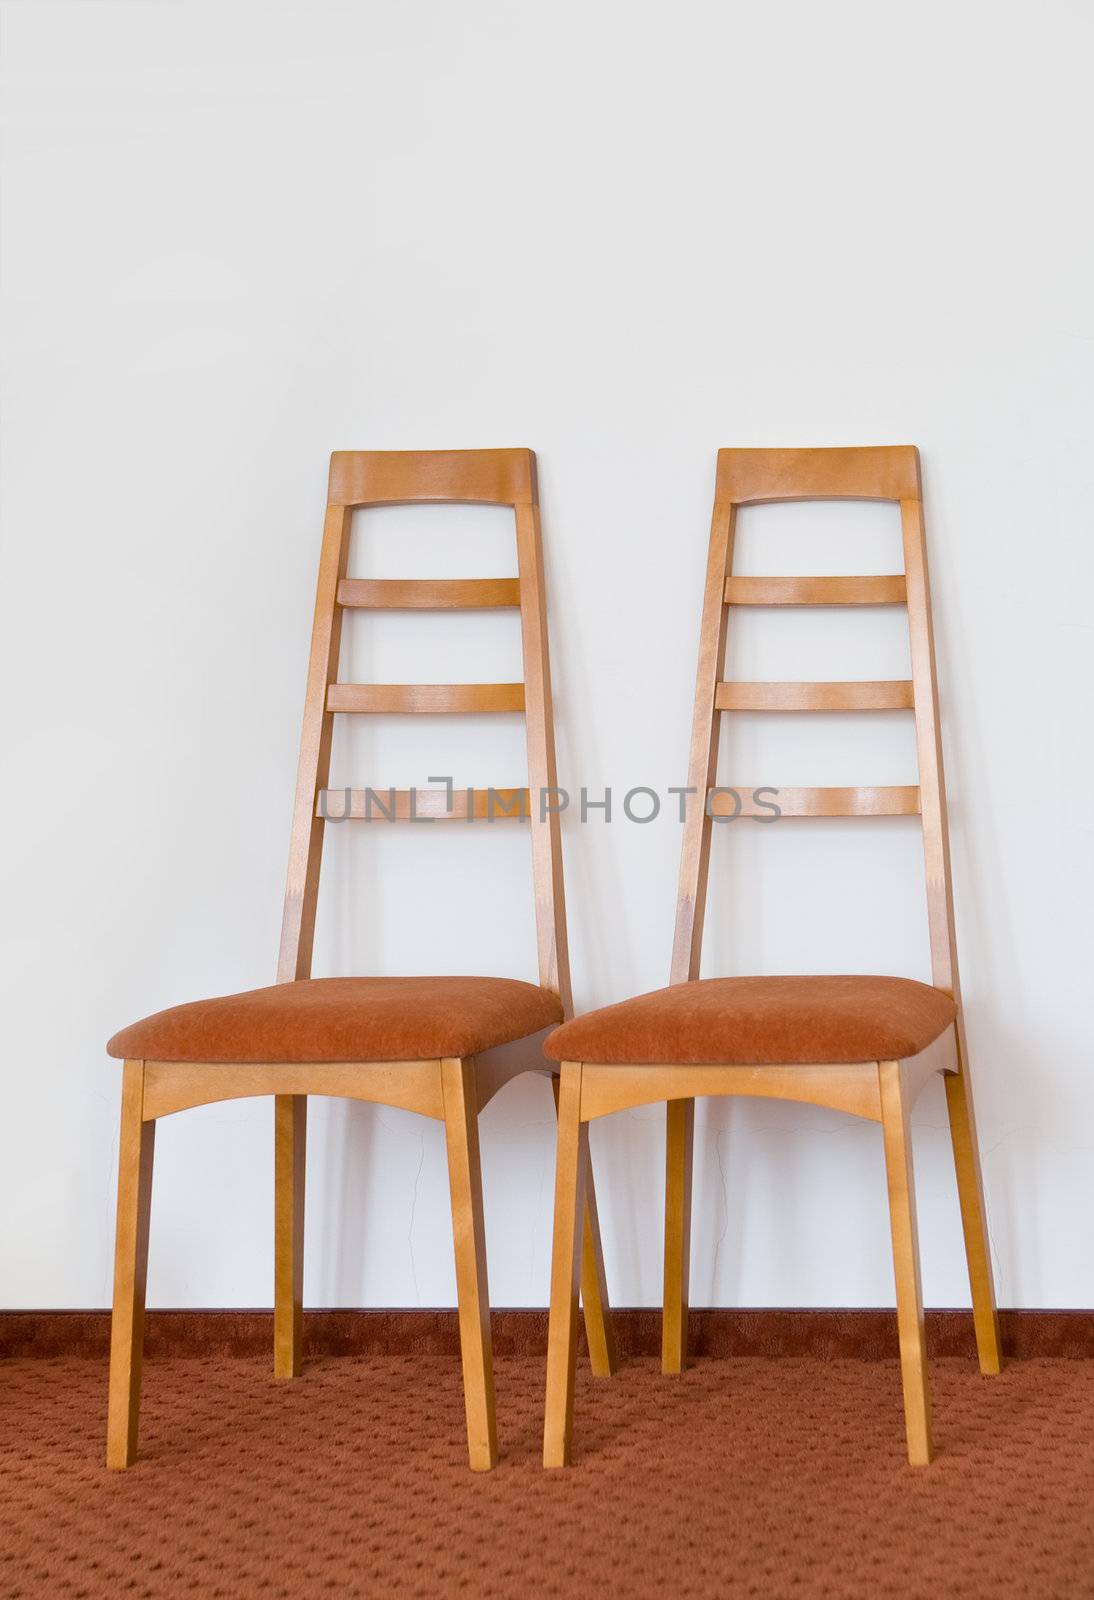 Two modern wooden chair. White wall and brown floor